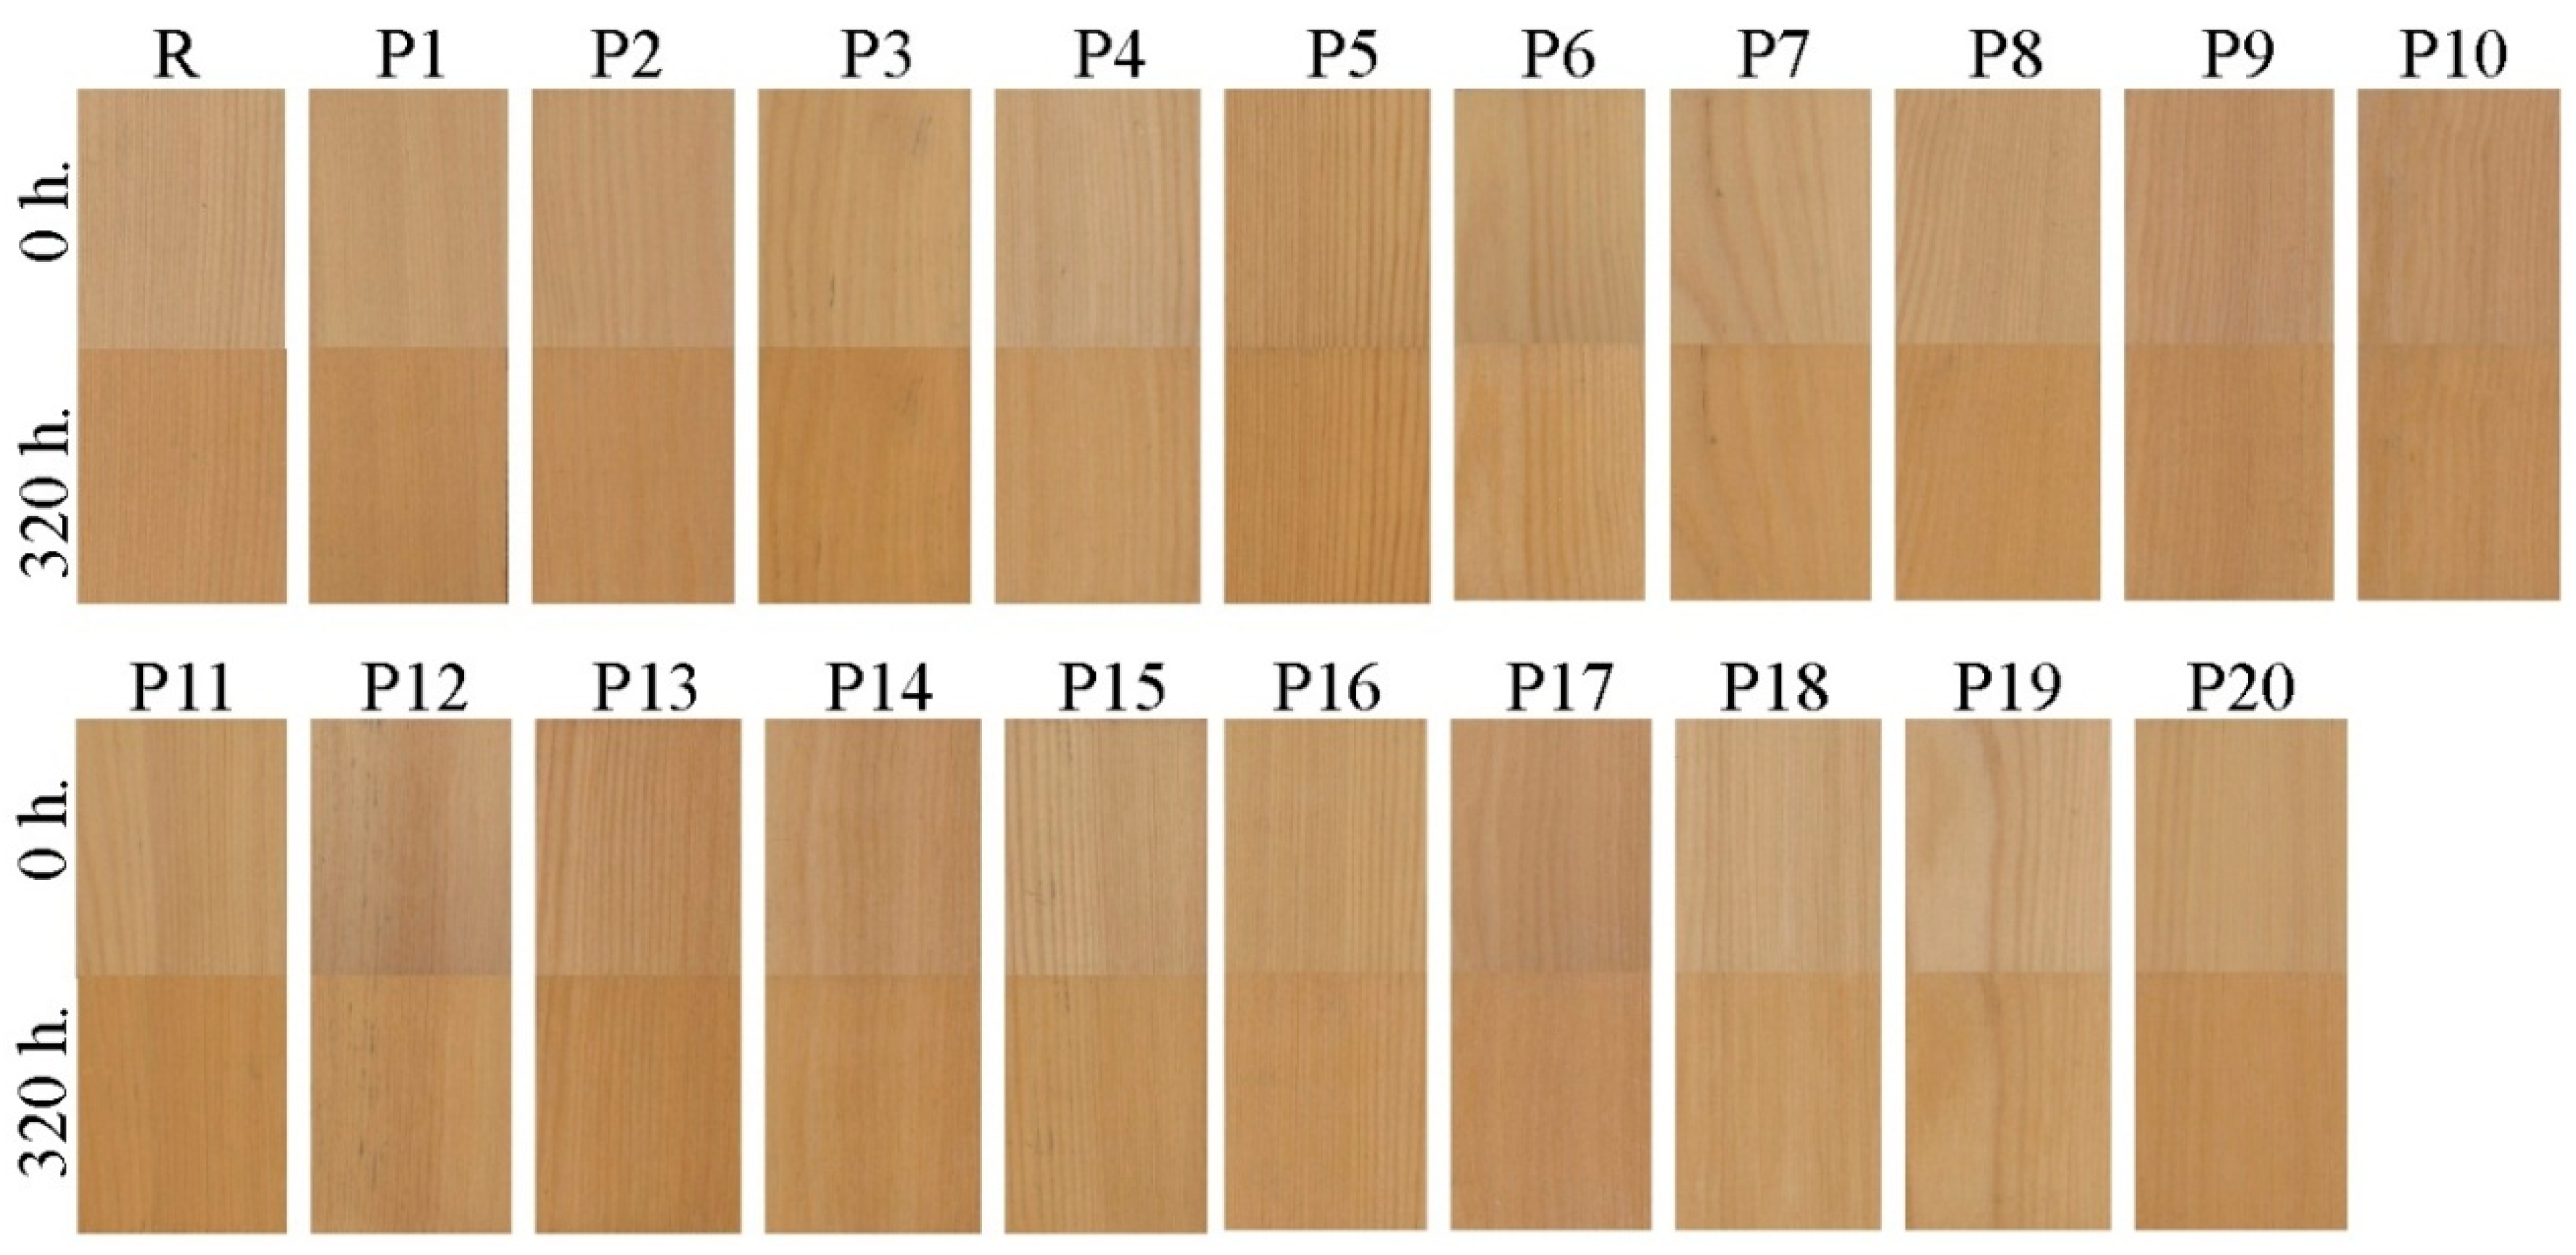 Forests | Free Full-Text | Color Stabilization of Siberian and European  Larch Wood Using UVA, HALS, and Nanoparticle Pretreatments | HTML